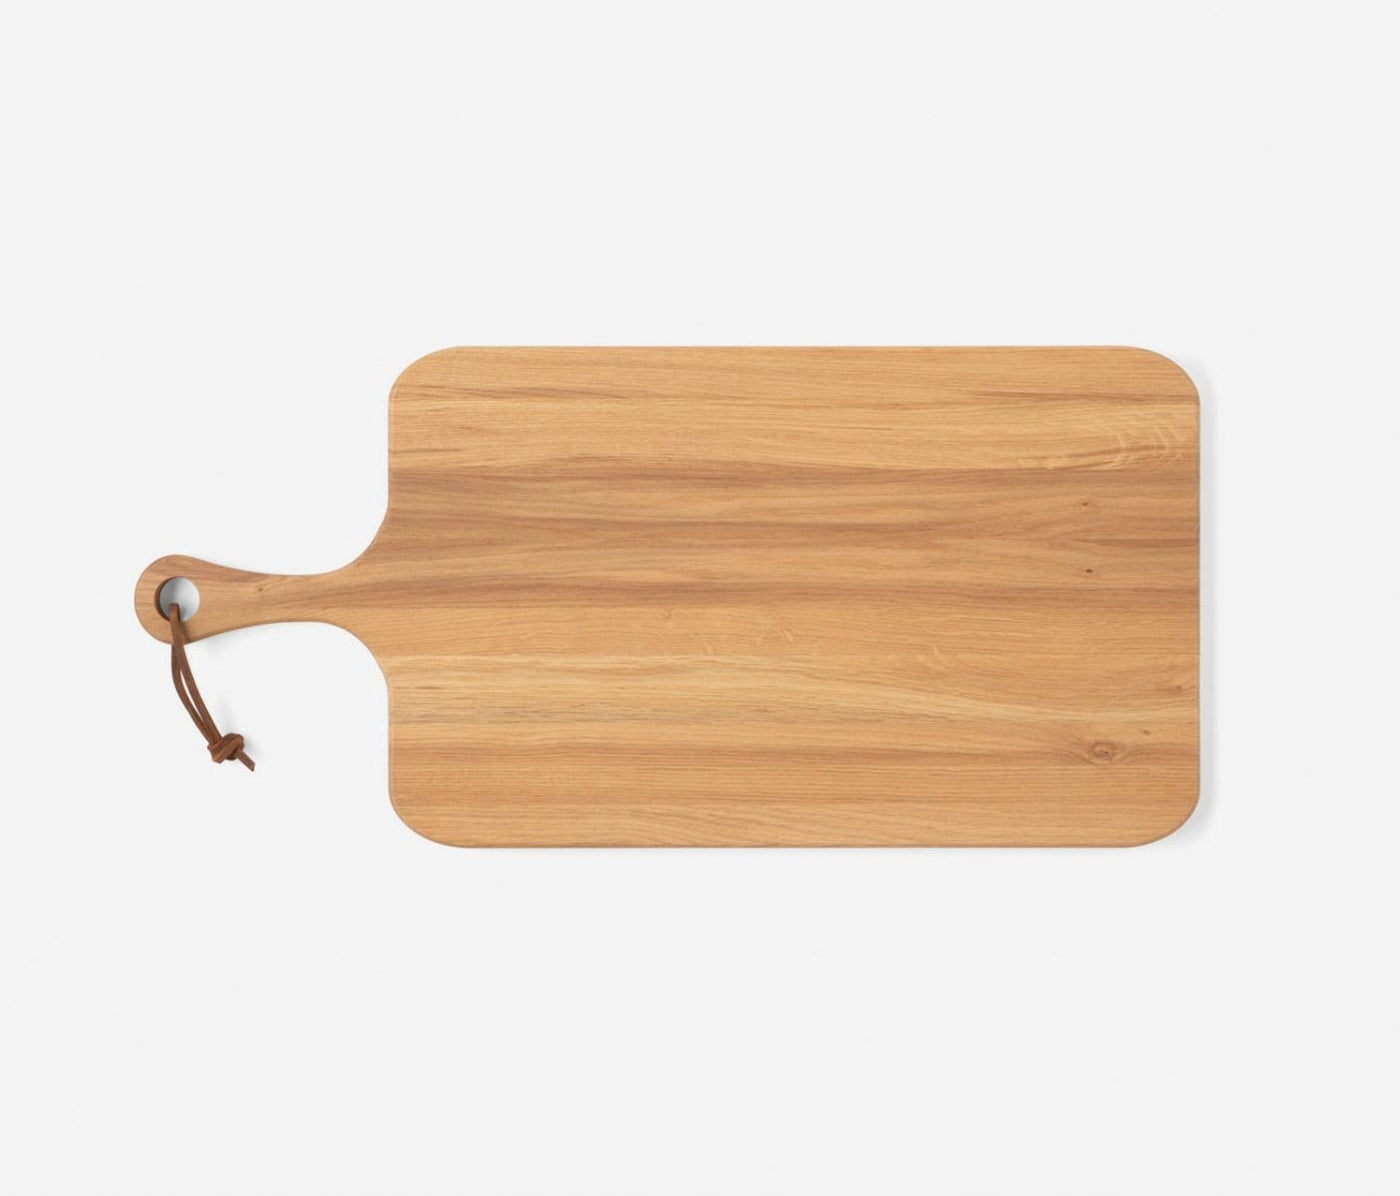 SERVING BOARD WOOD WALNUT (Available in different sizes & colors)